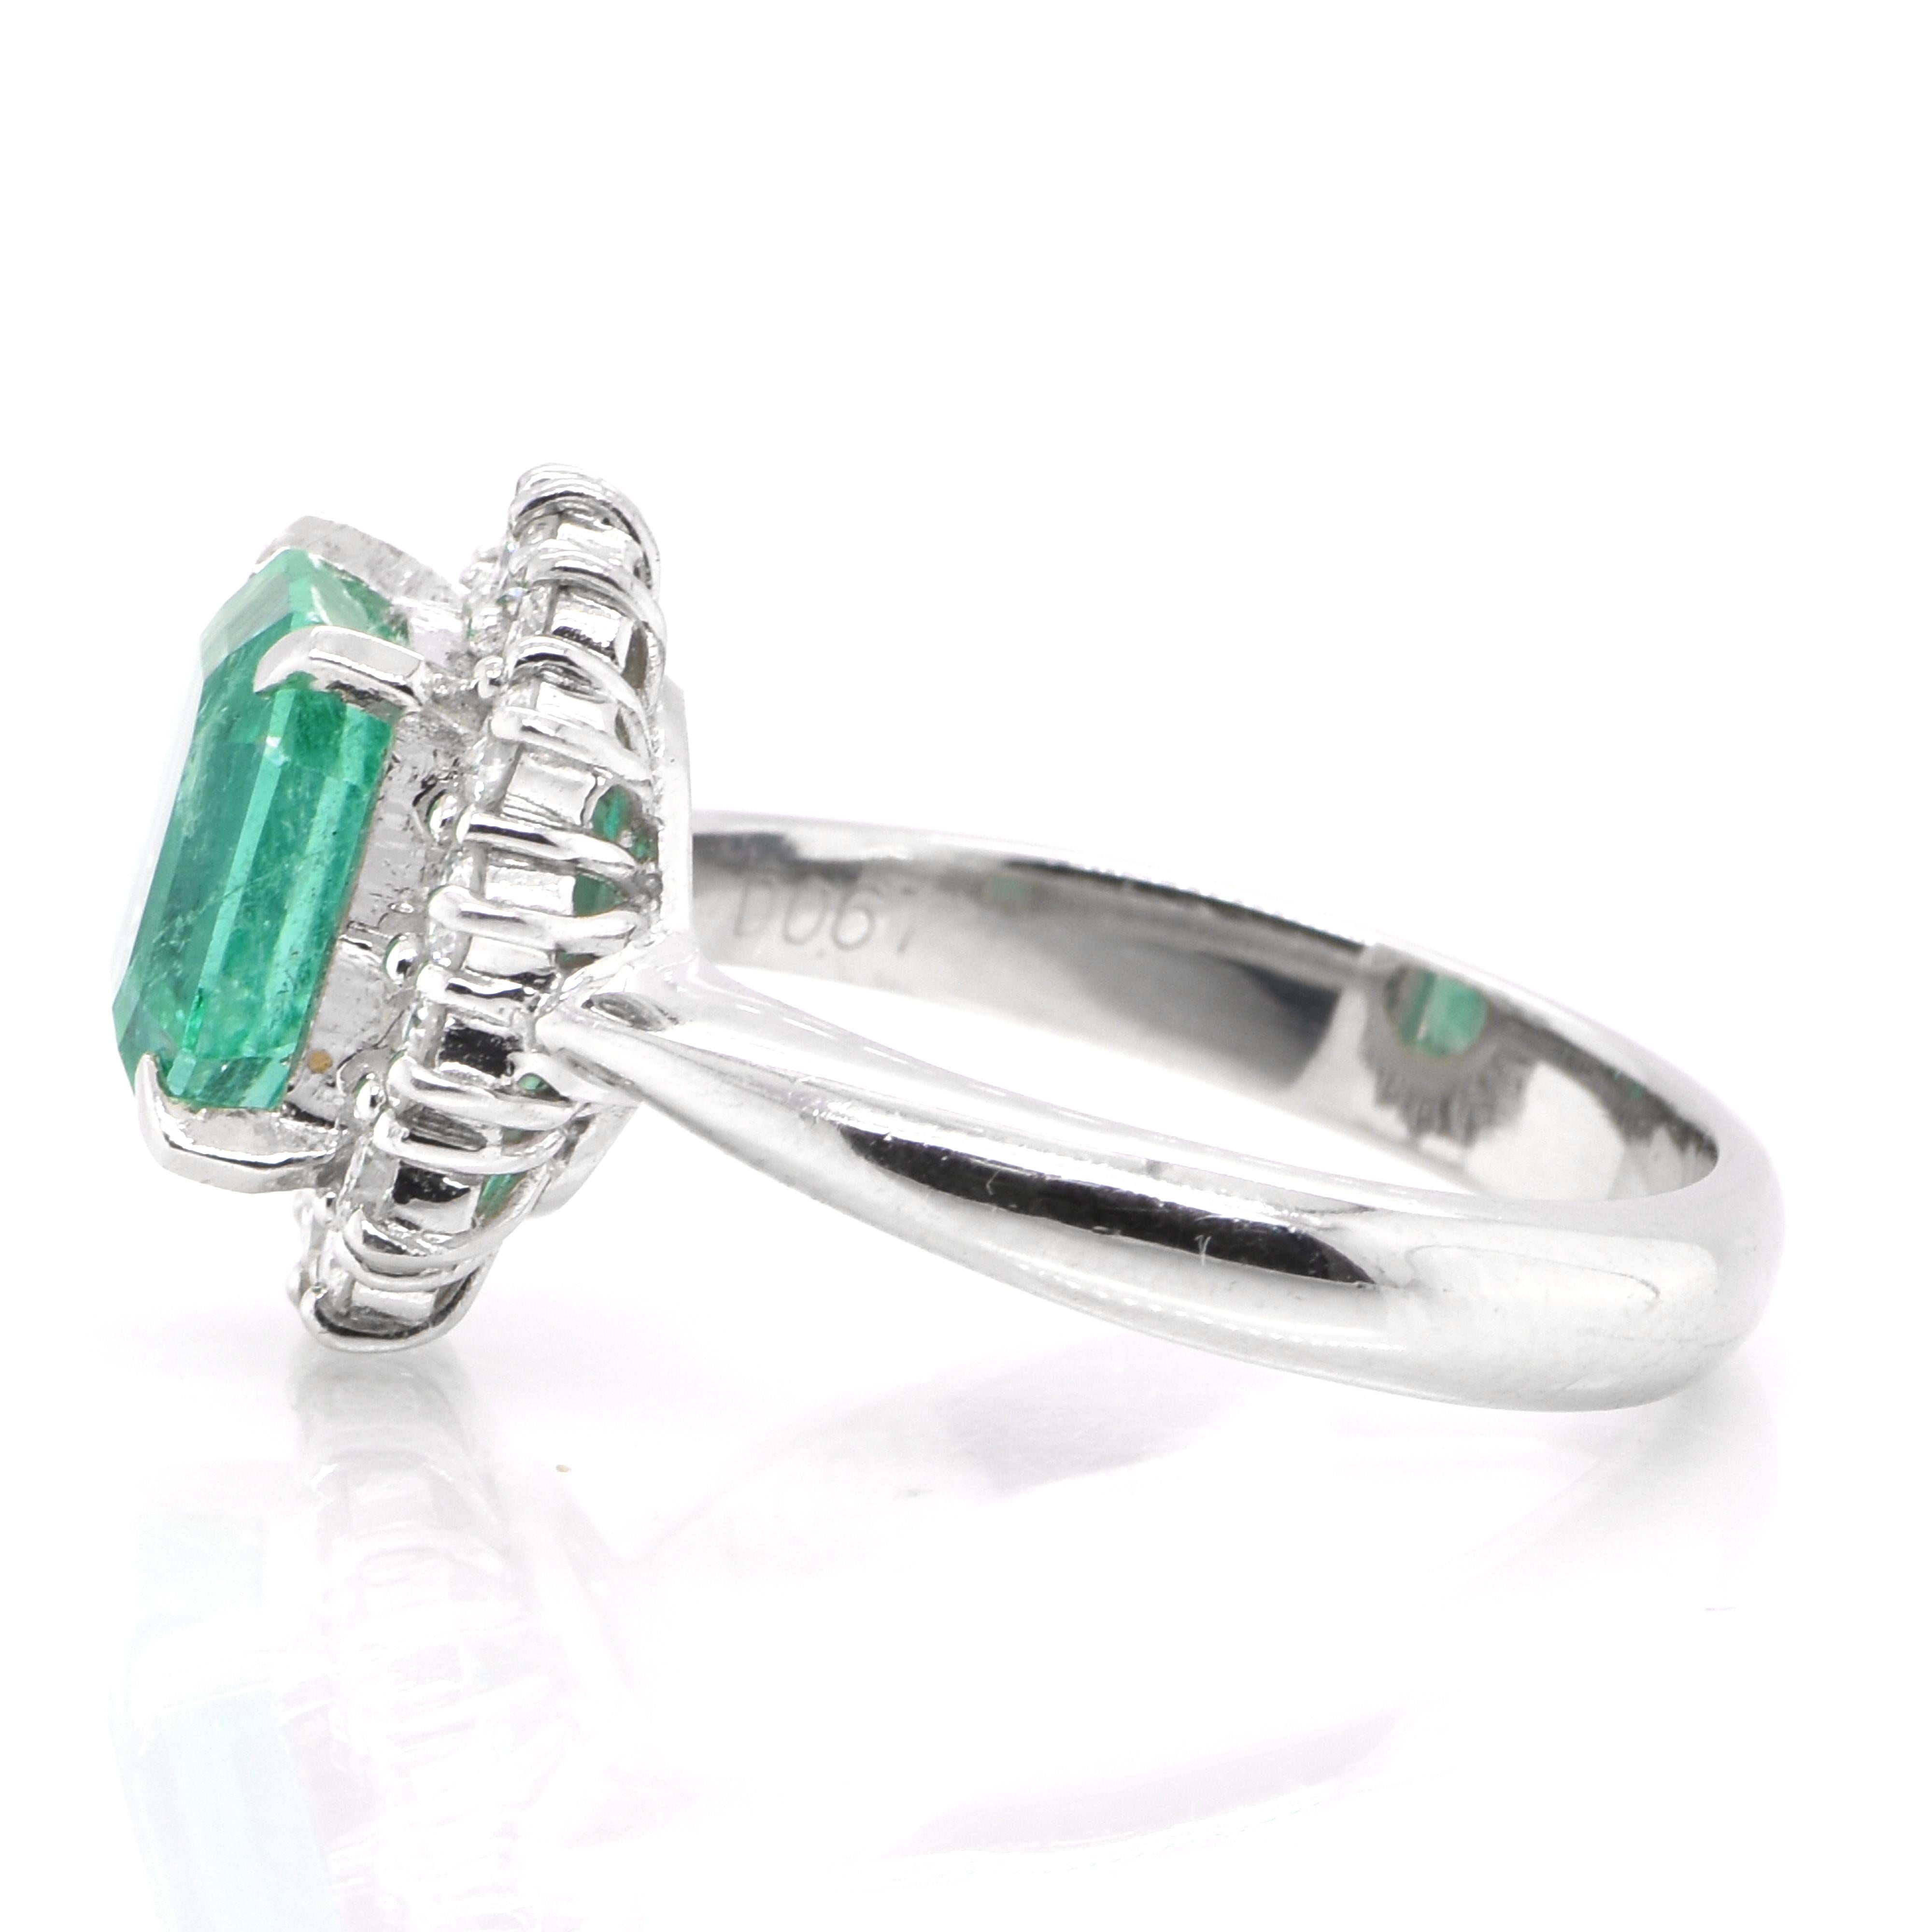 Emerald Cut 2.79 Carat Natural Colombian Emerald and Diamond Halo Ring Set in Platinum